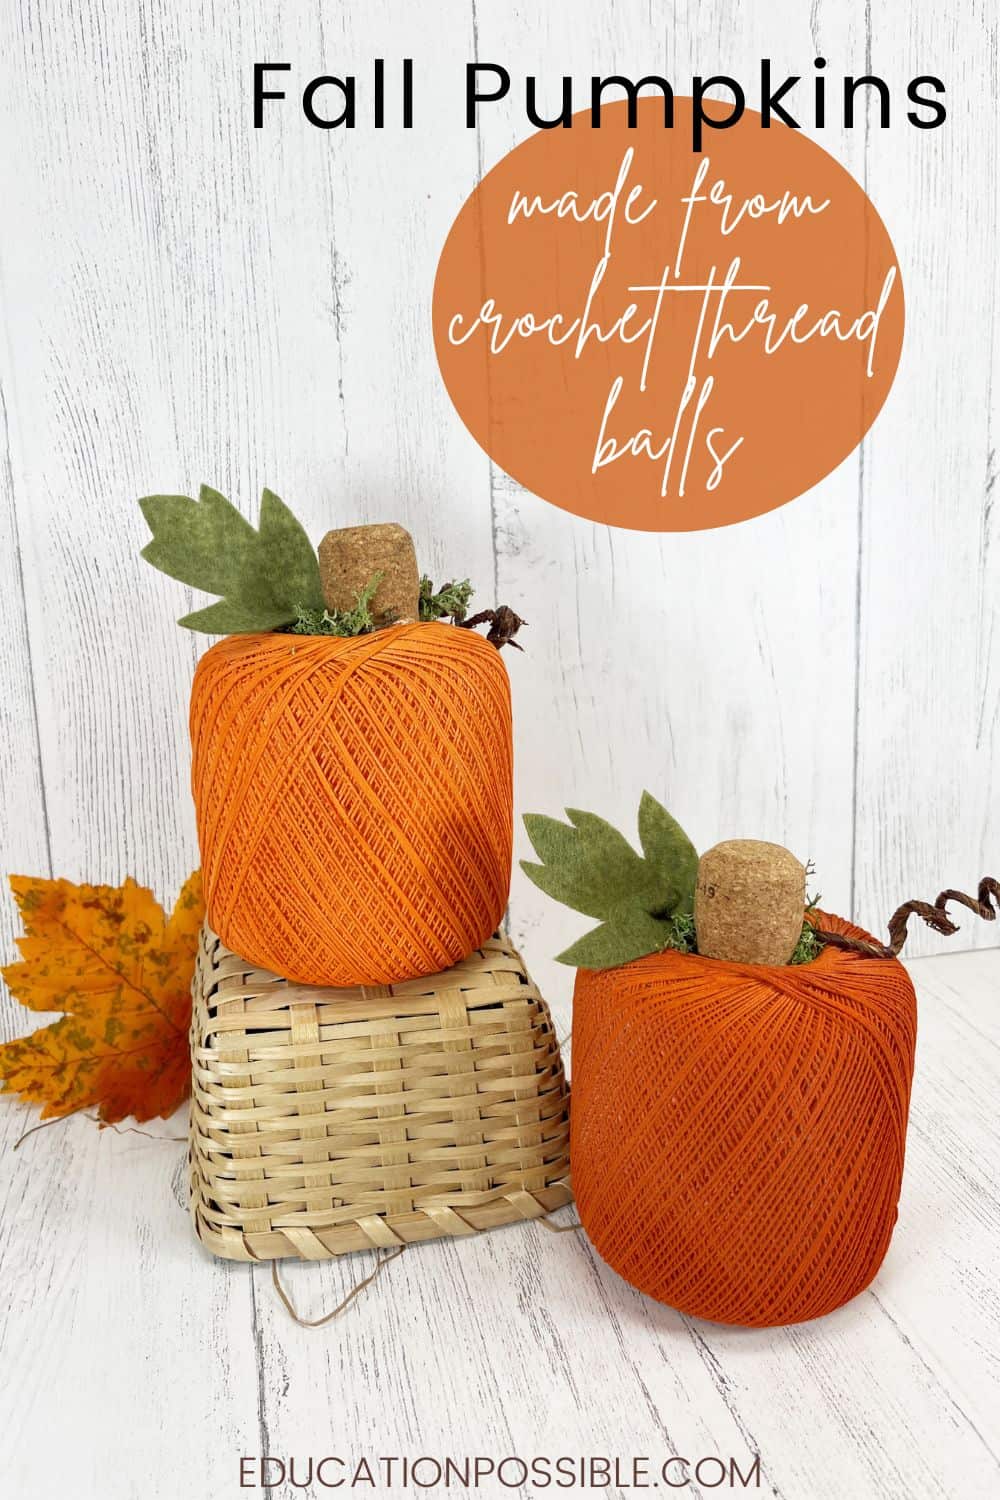 These Upcycled Crochet Thread Ball Pumpkins are a Cute Craft for Tweens